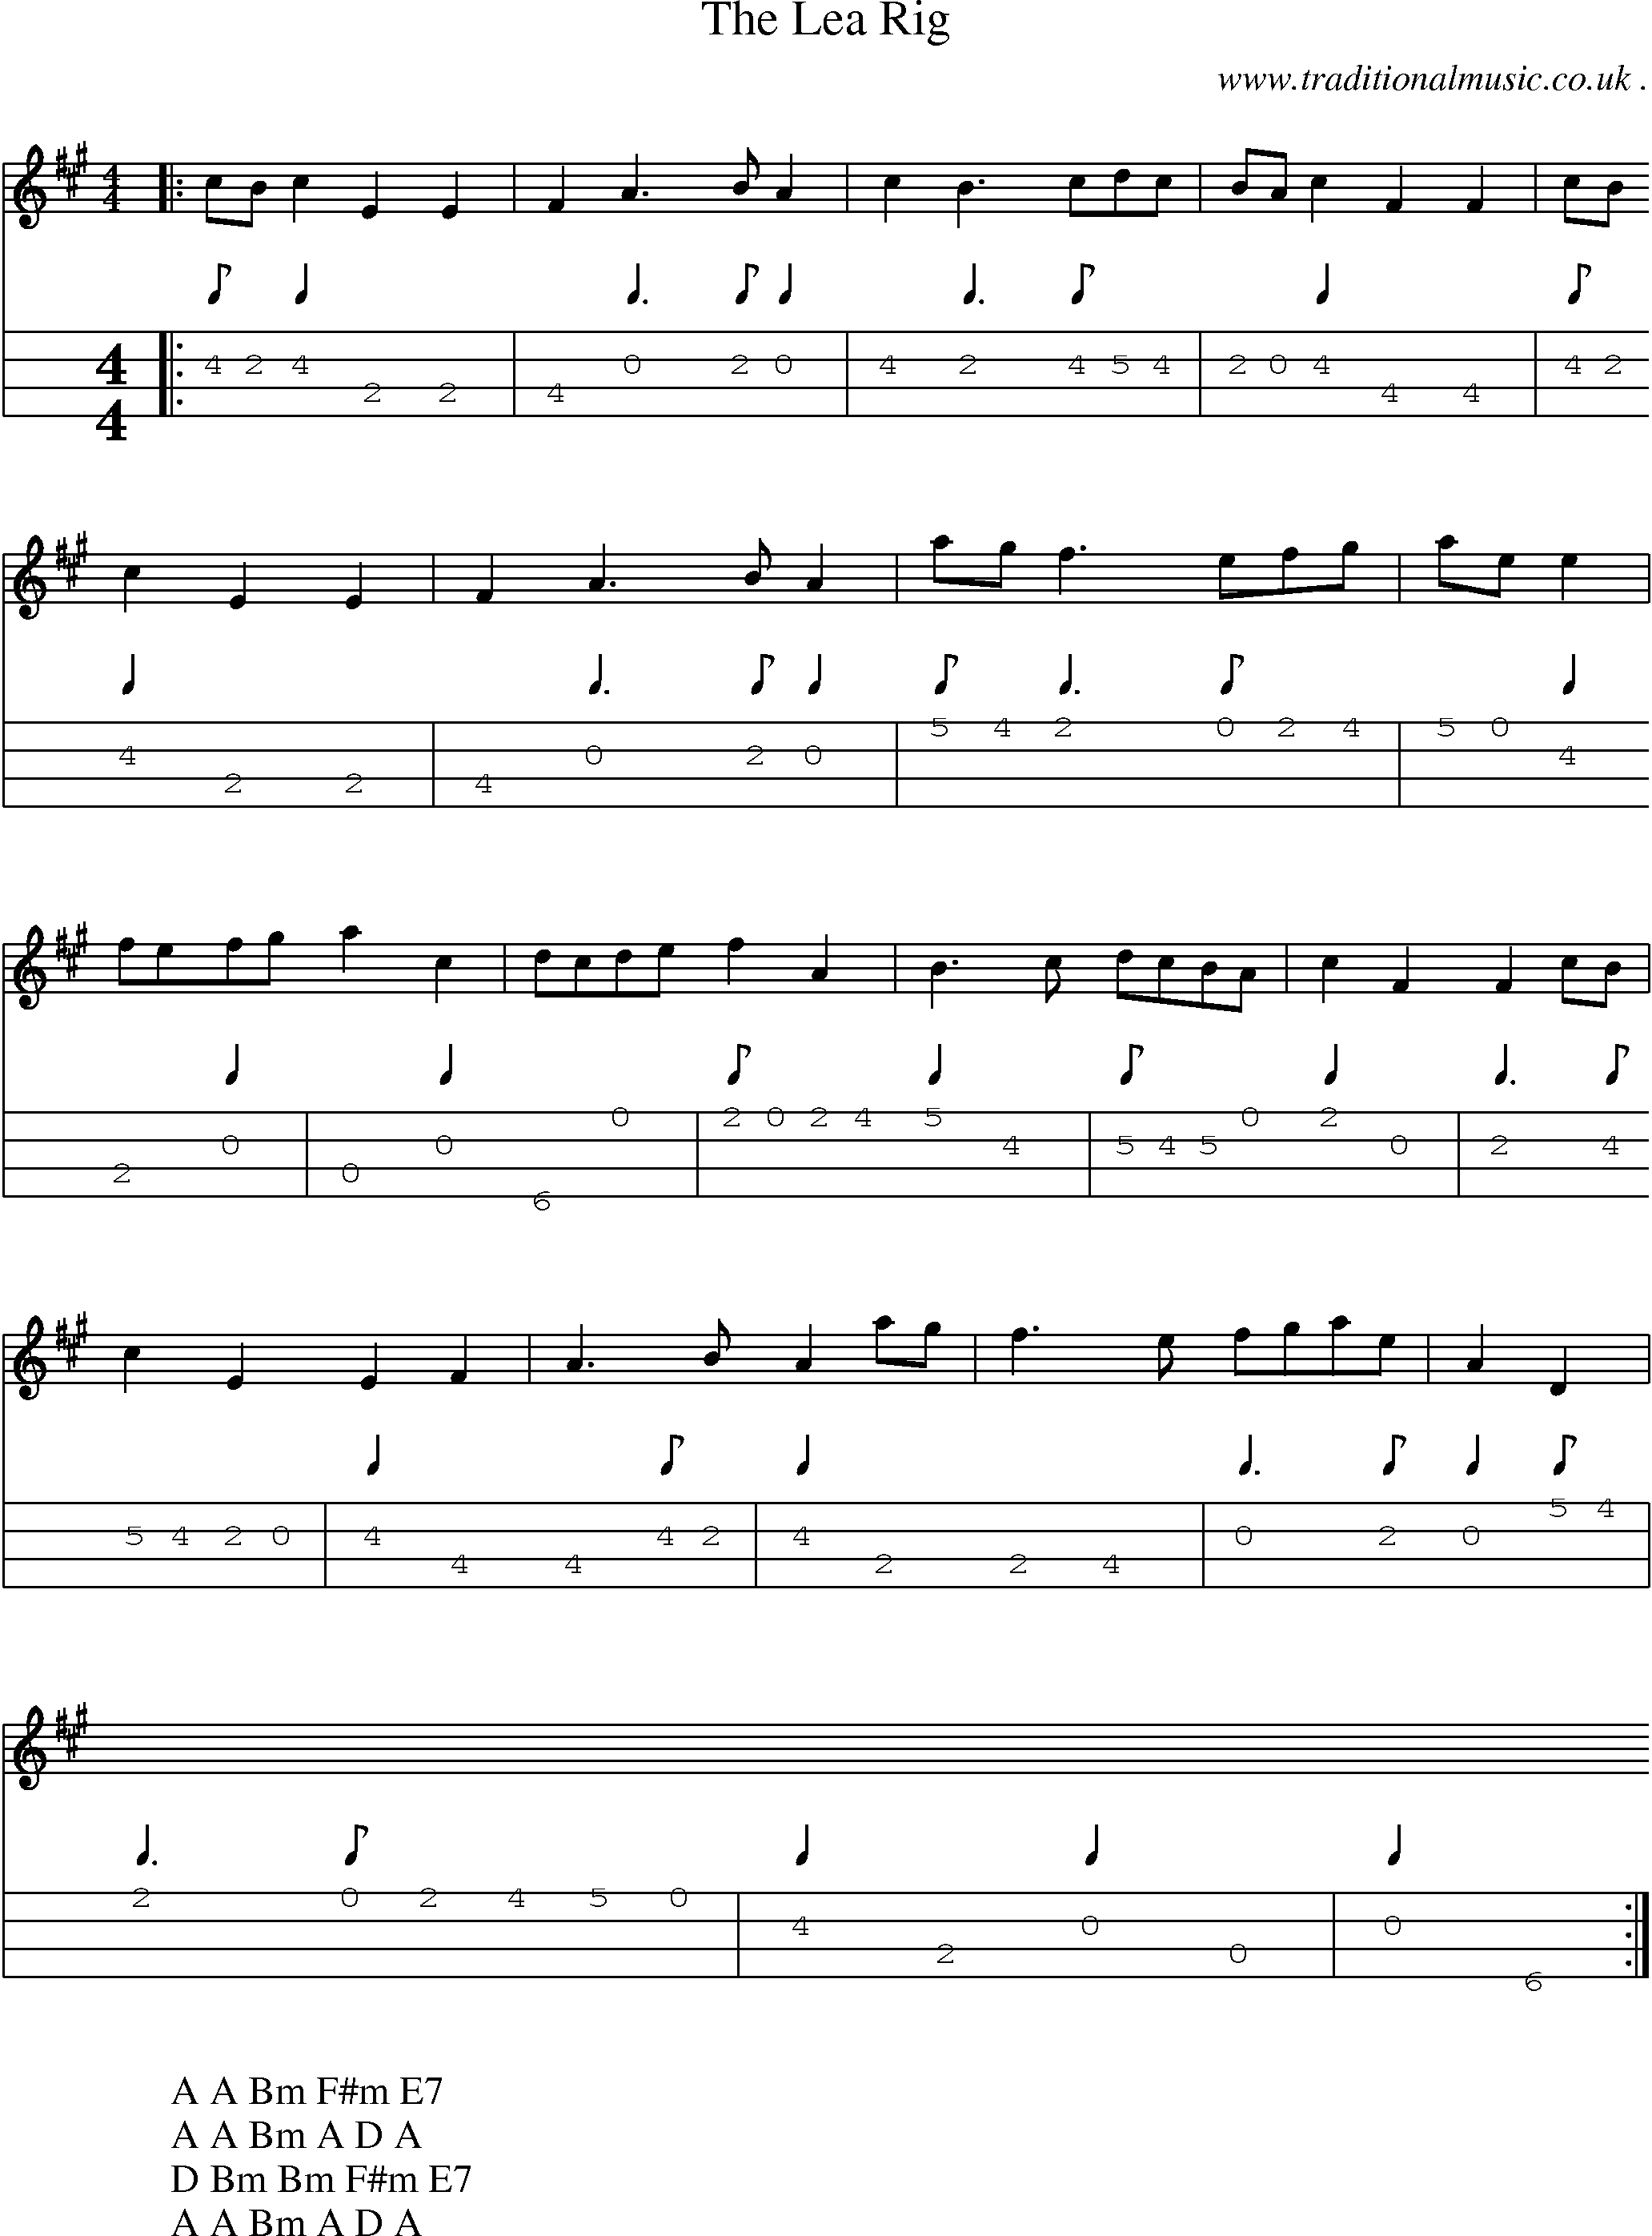 Sheet-Music and Mandolin Tabs for The Lea Rig